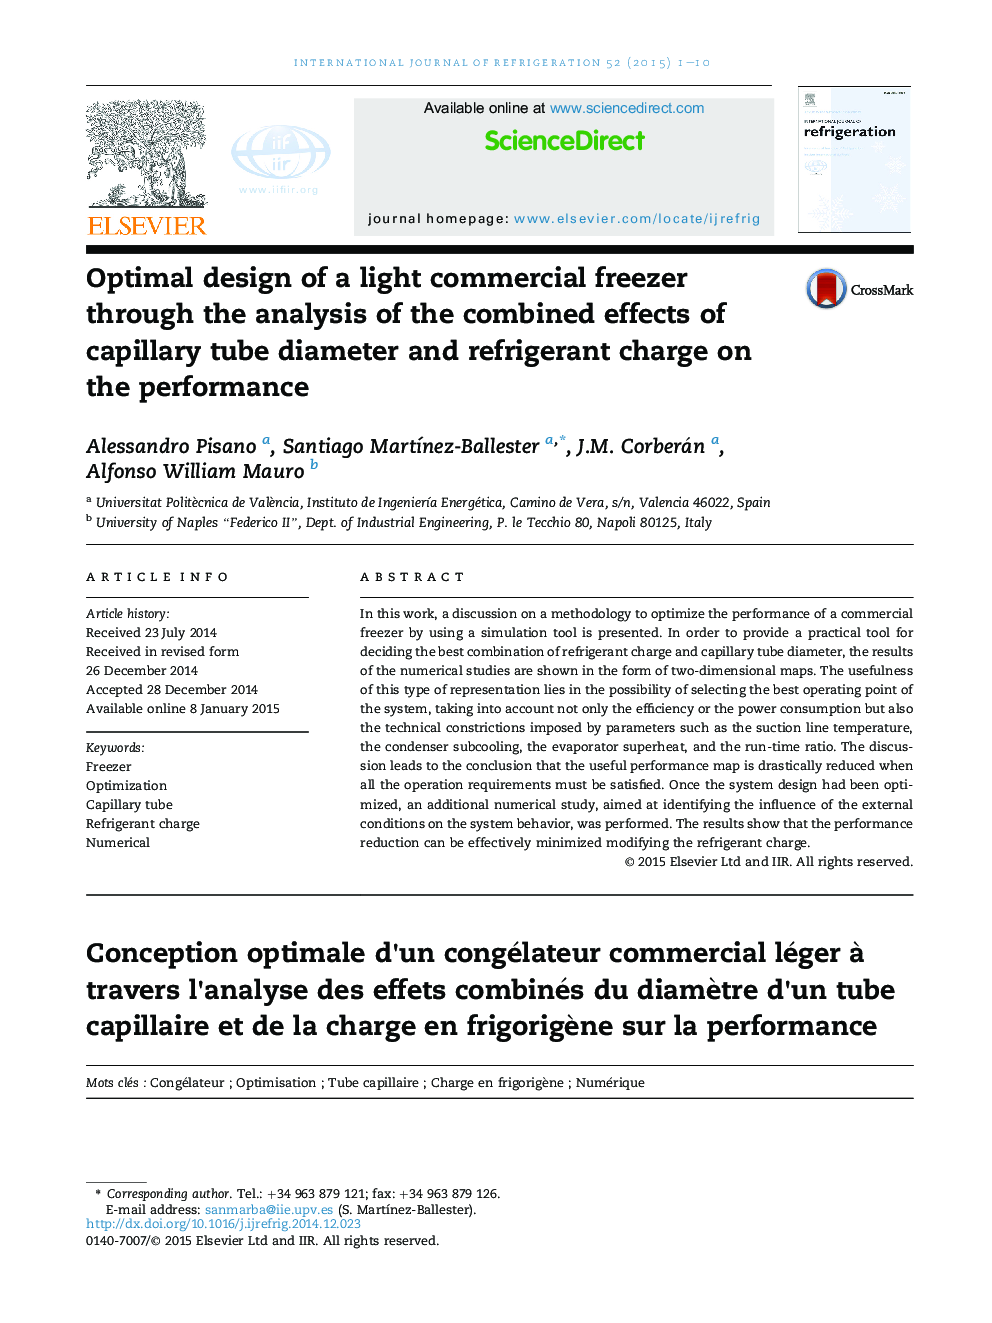 Optimal design of a light commercial freezer through the analysis of the combined effects of capillary tube diameter and refrigerant charge on the performance